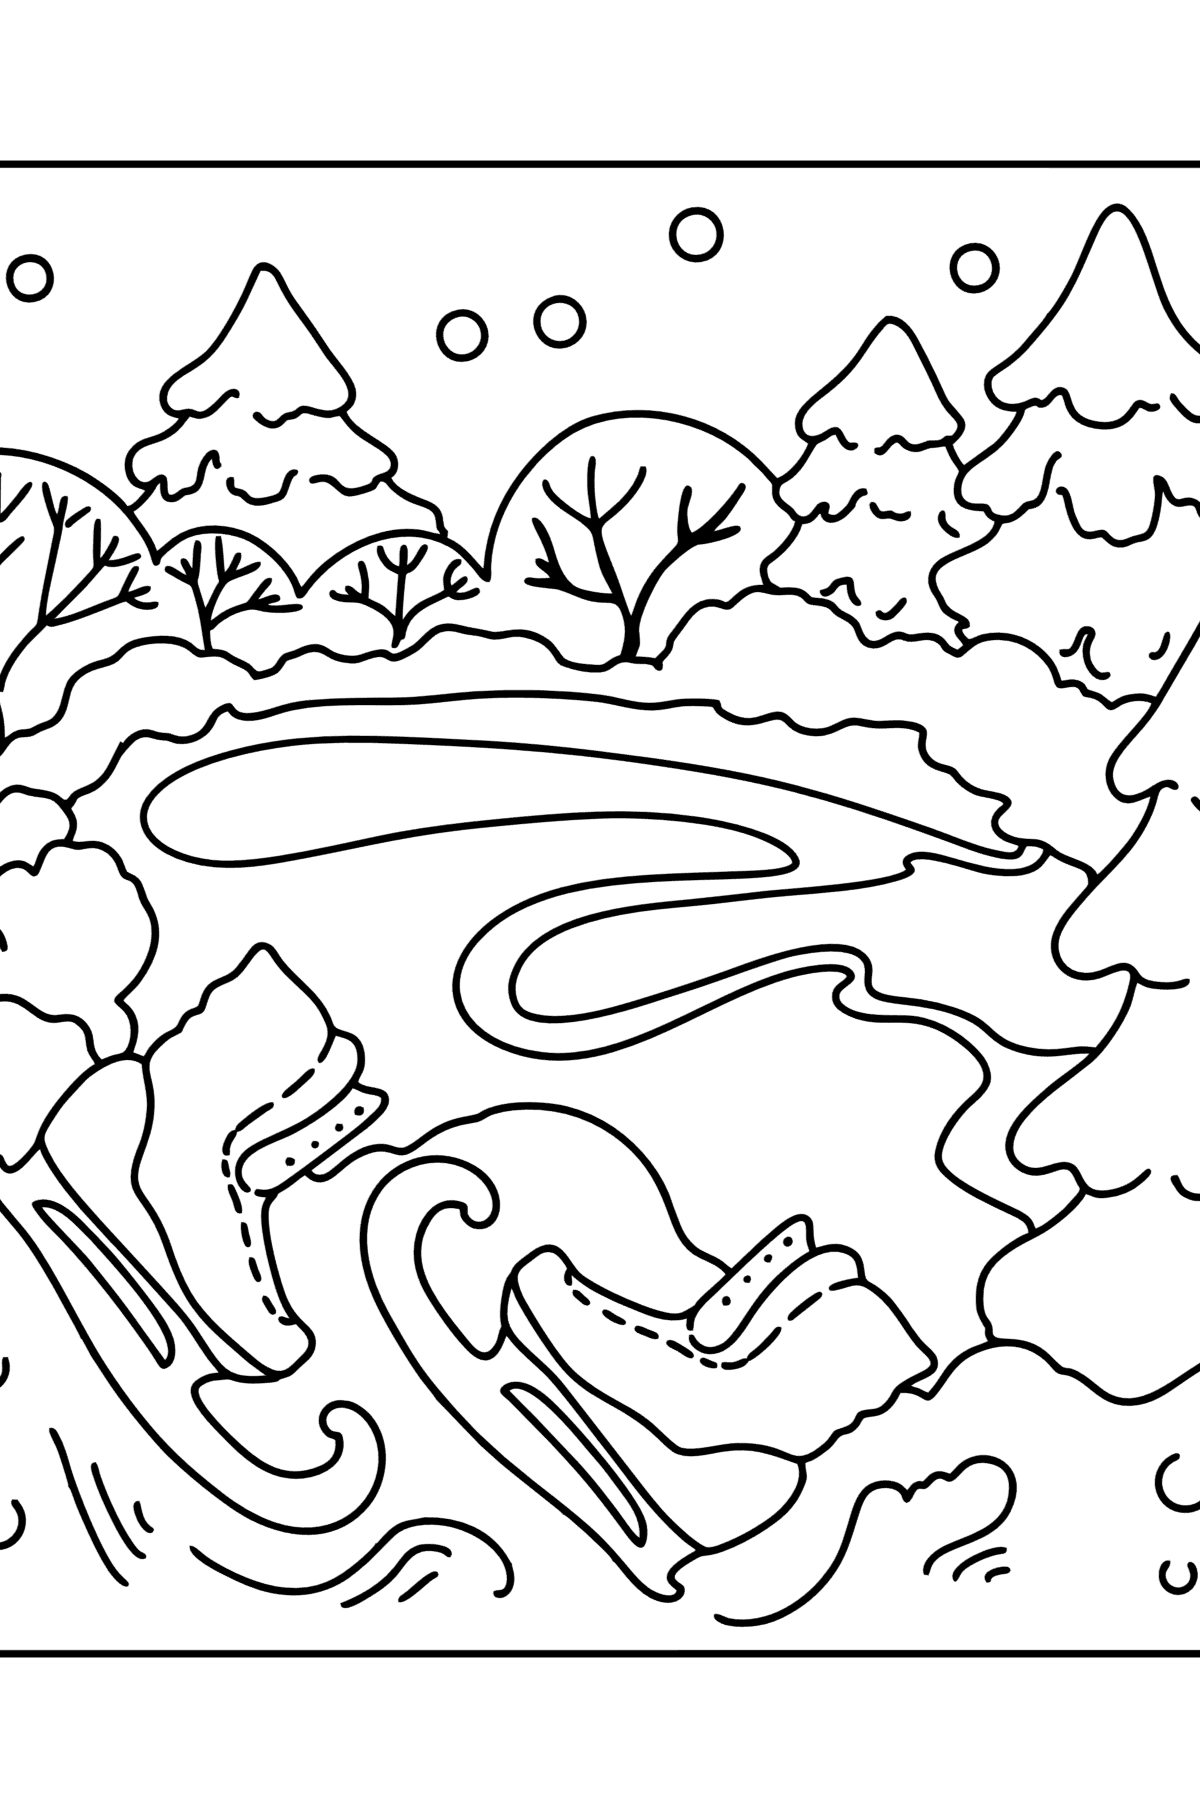 Coloring page - Winter and skates - Coloring Pages for Kids